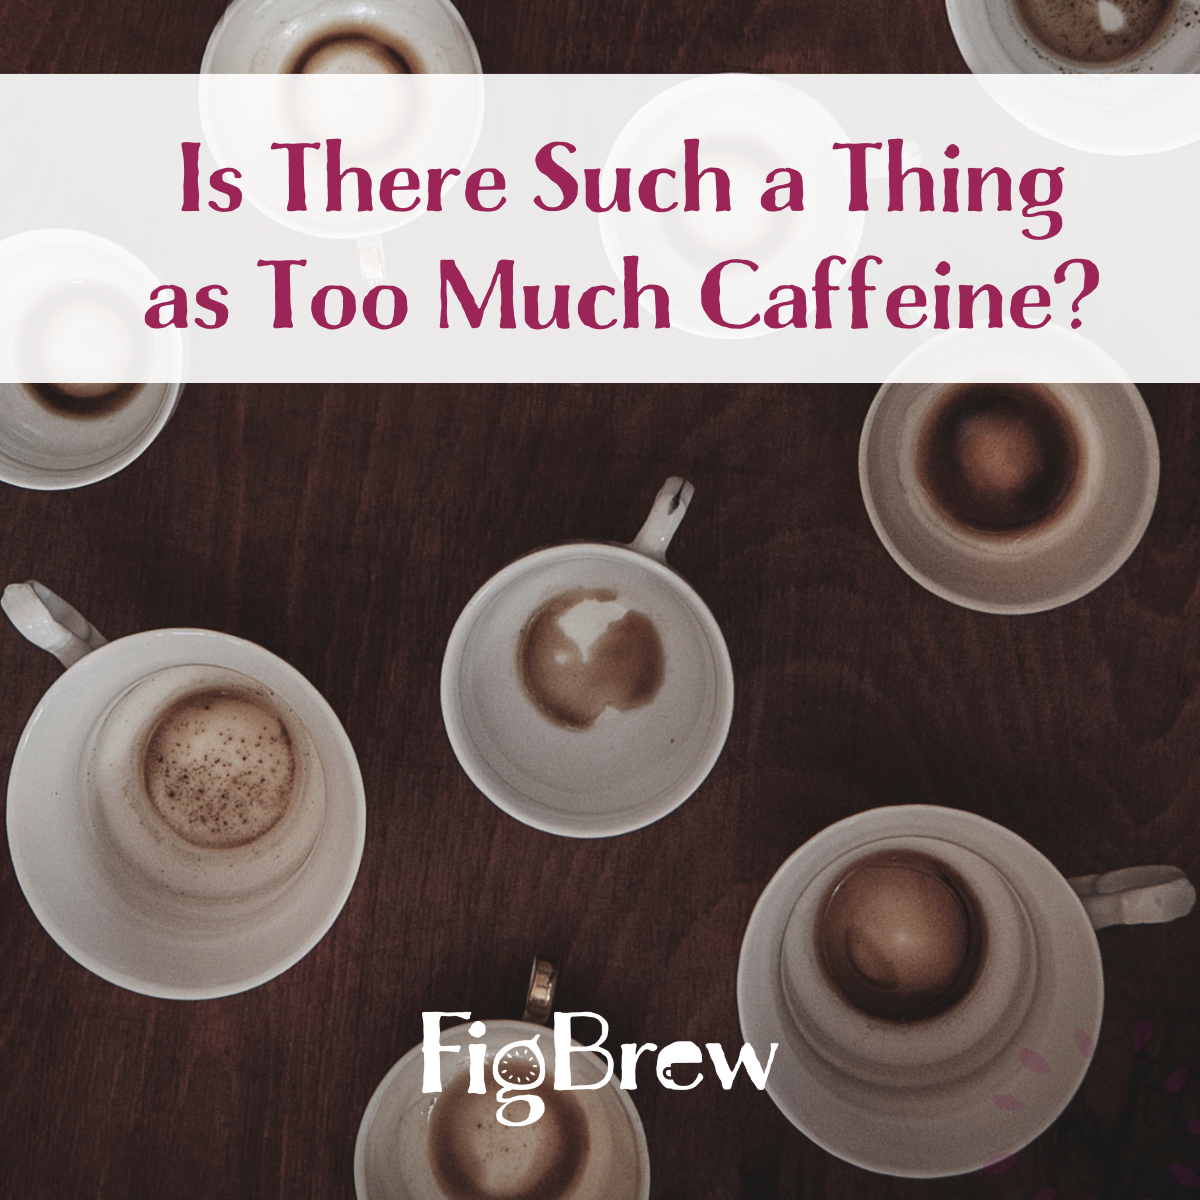 Is There Such a Thing as Too Much Caffeine?